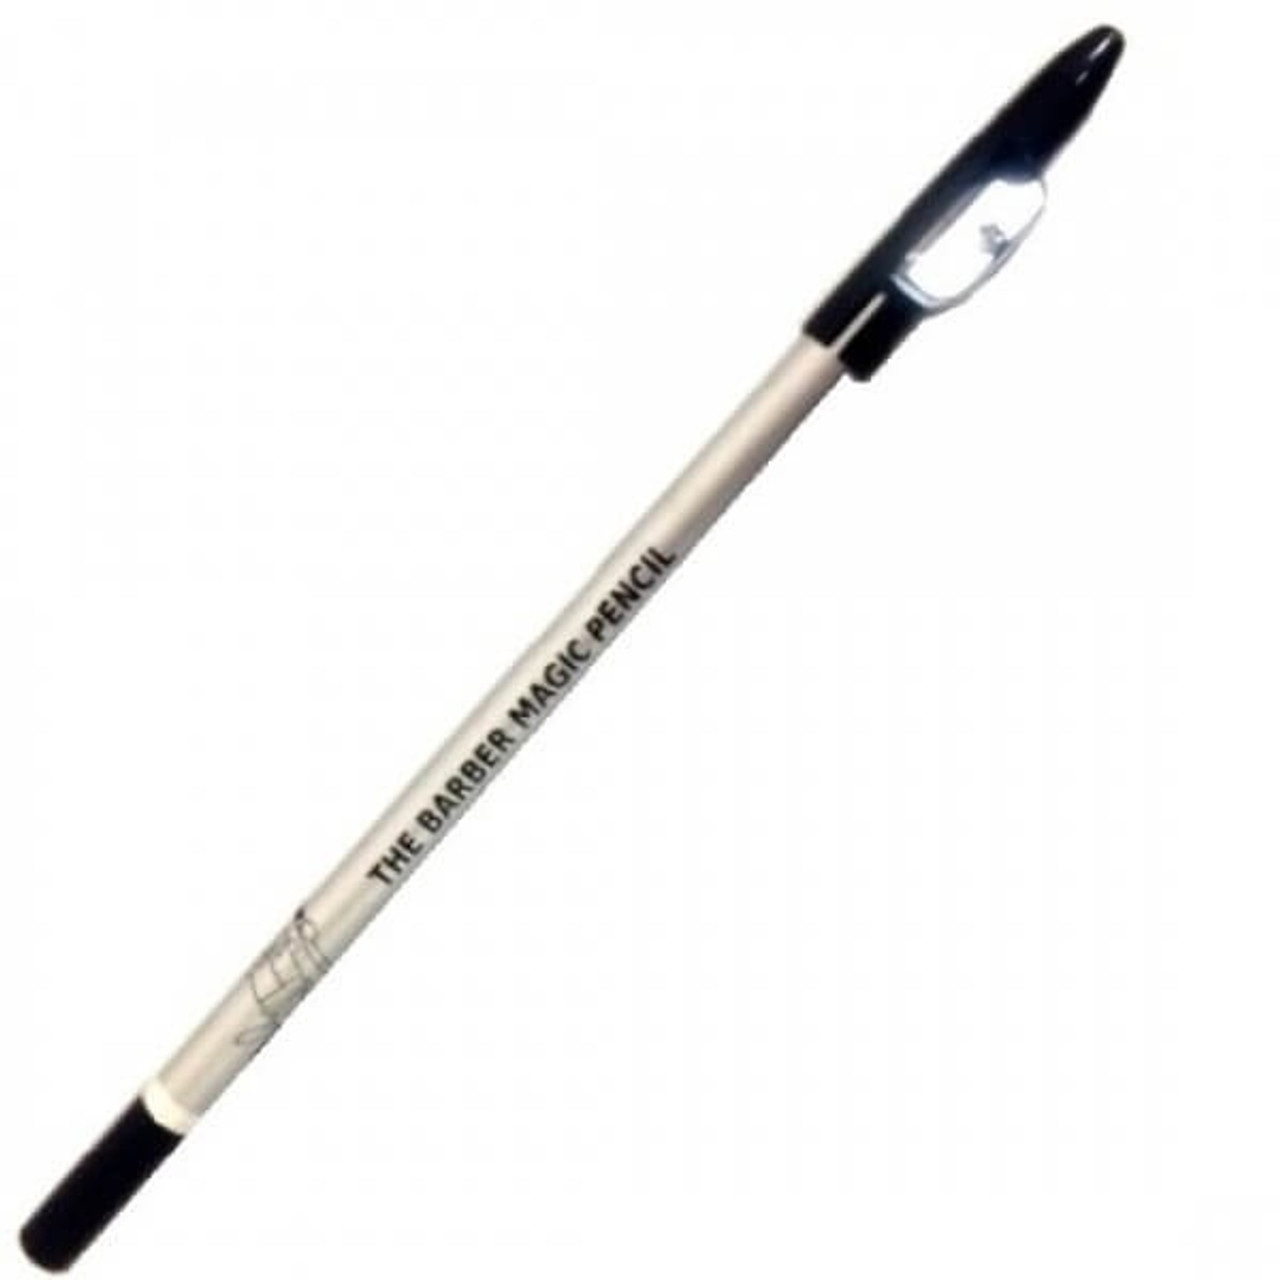 Barber Magic Pencil - Weiss Barber Supply